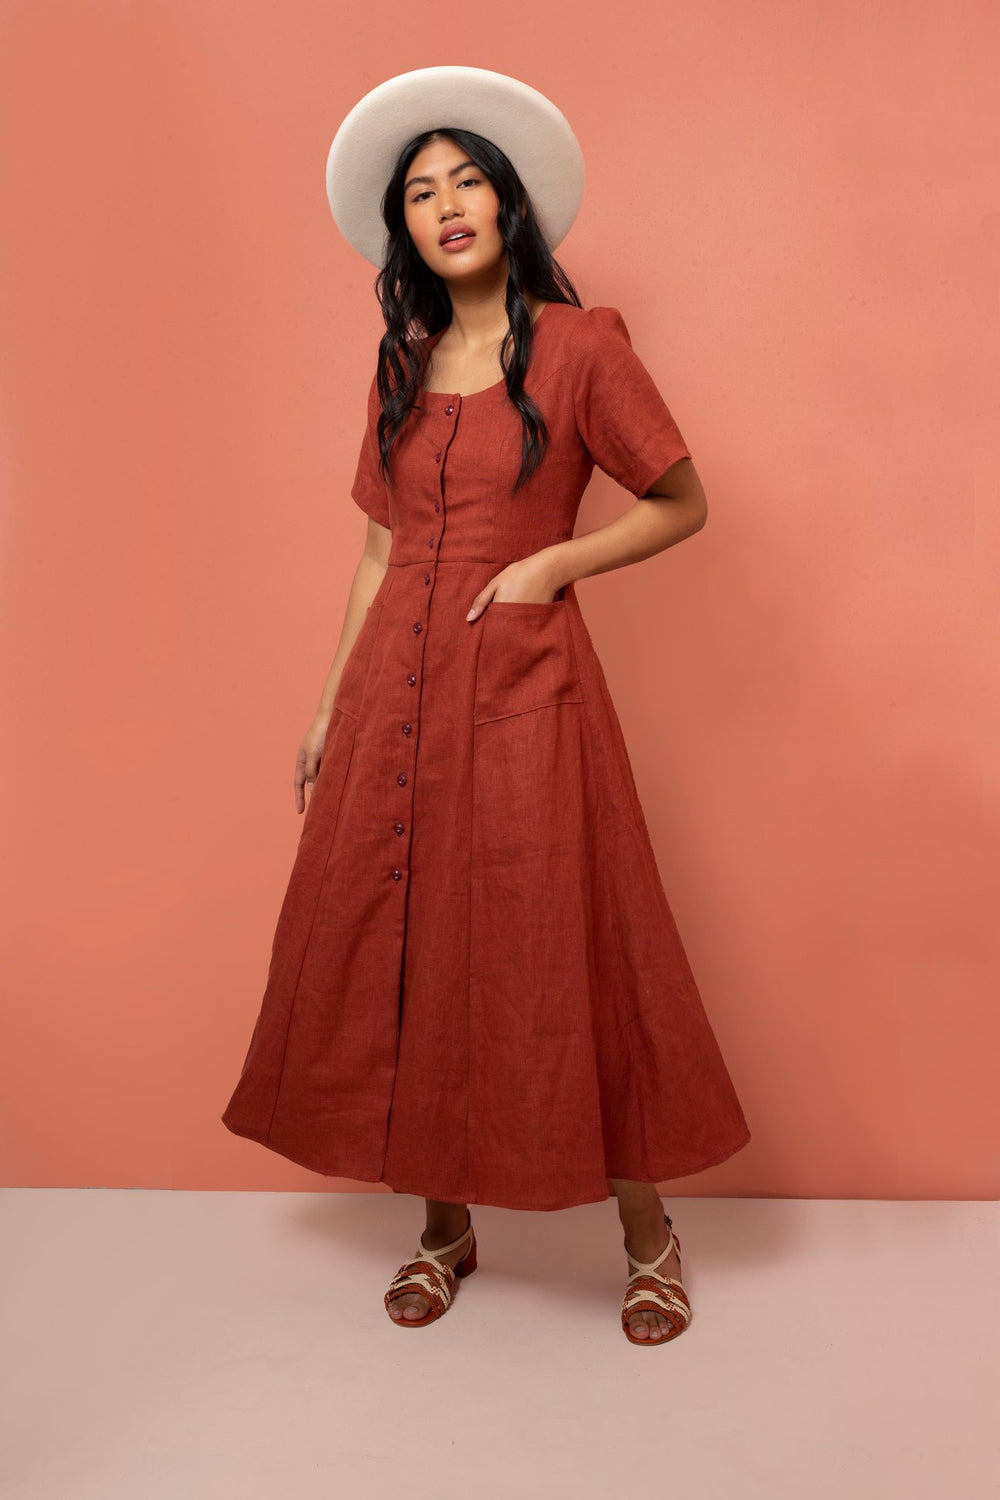 Woman wearing the Hughes Dress sewing pattern from Friday Pattern Company on The Fold Line. A dress pattern made in rayon, silk or linen fabrics, featuring Viennese seams, gathered sleeves, scoop neckline, lined bodice, A-line skirt, button front closure,